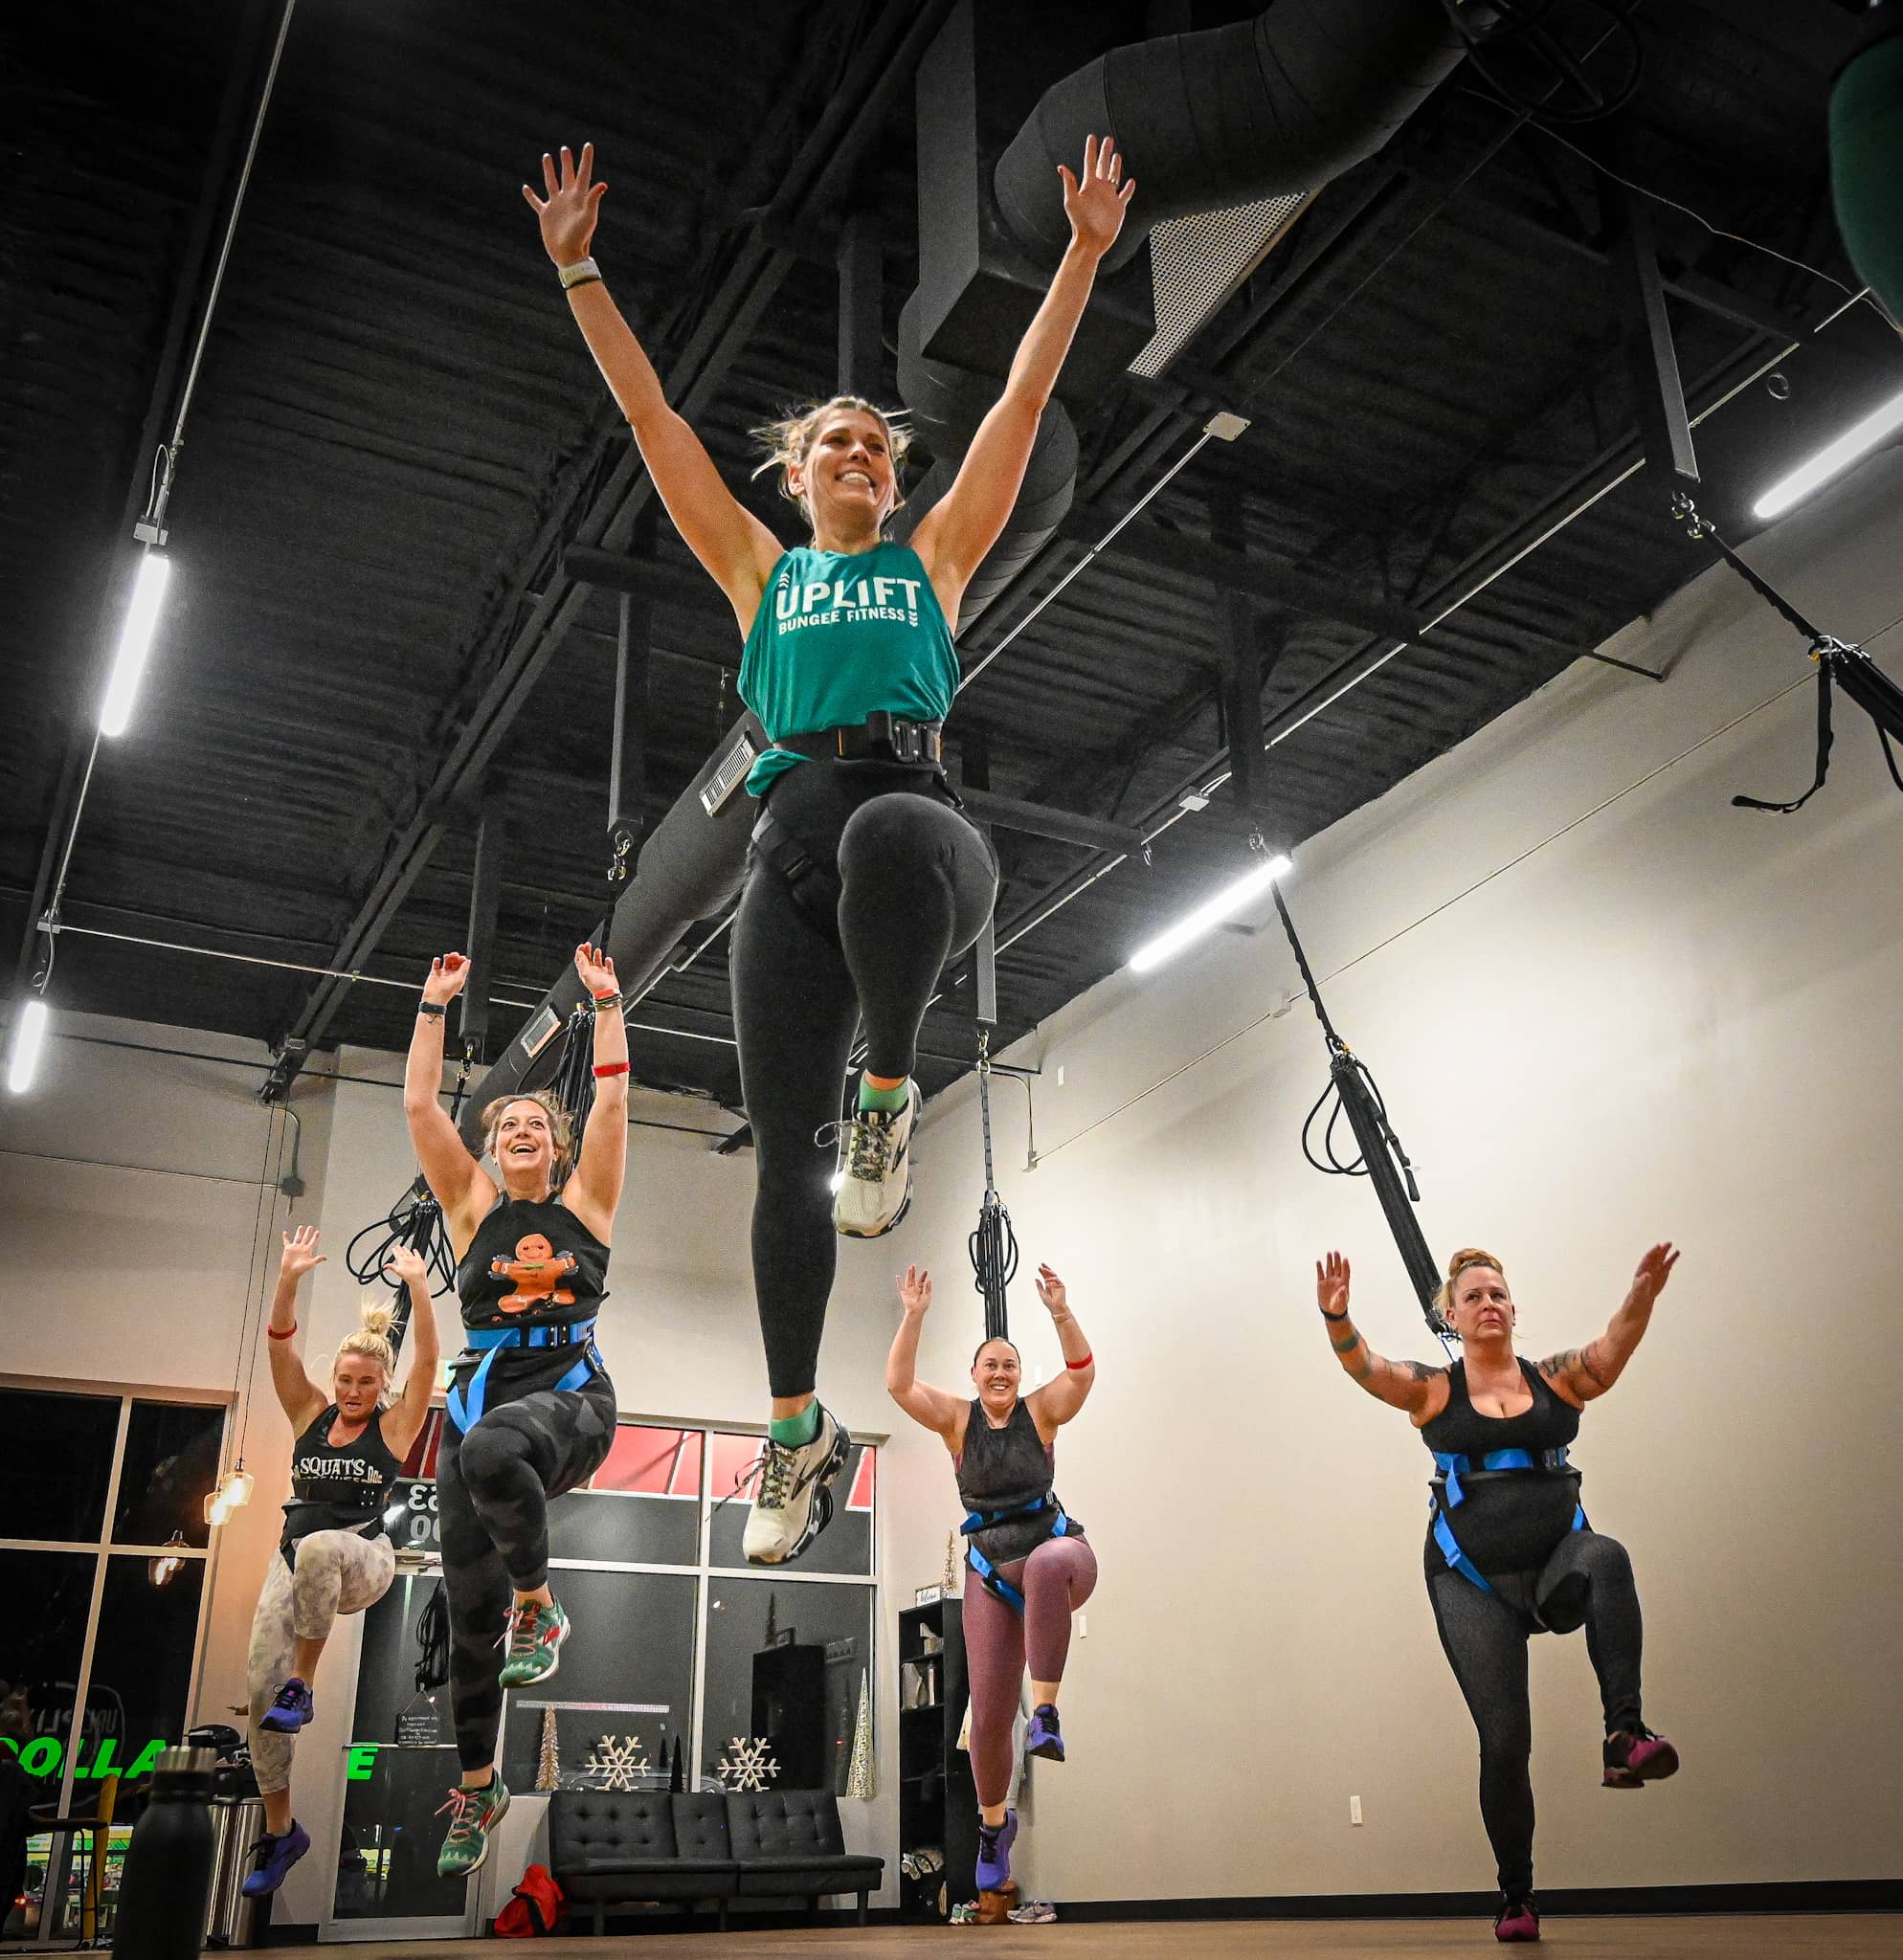 Uplift your routine': New bungee fitness facility in Rockton to host grand  opening